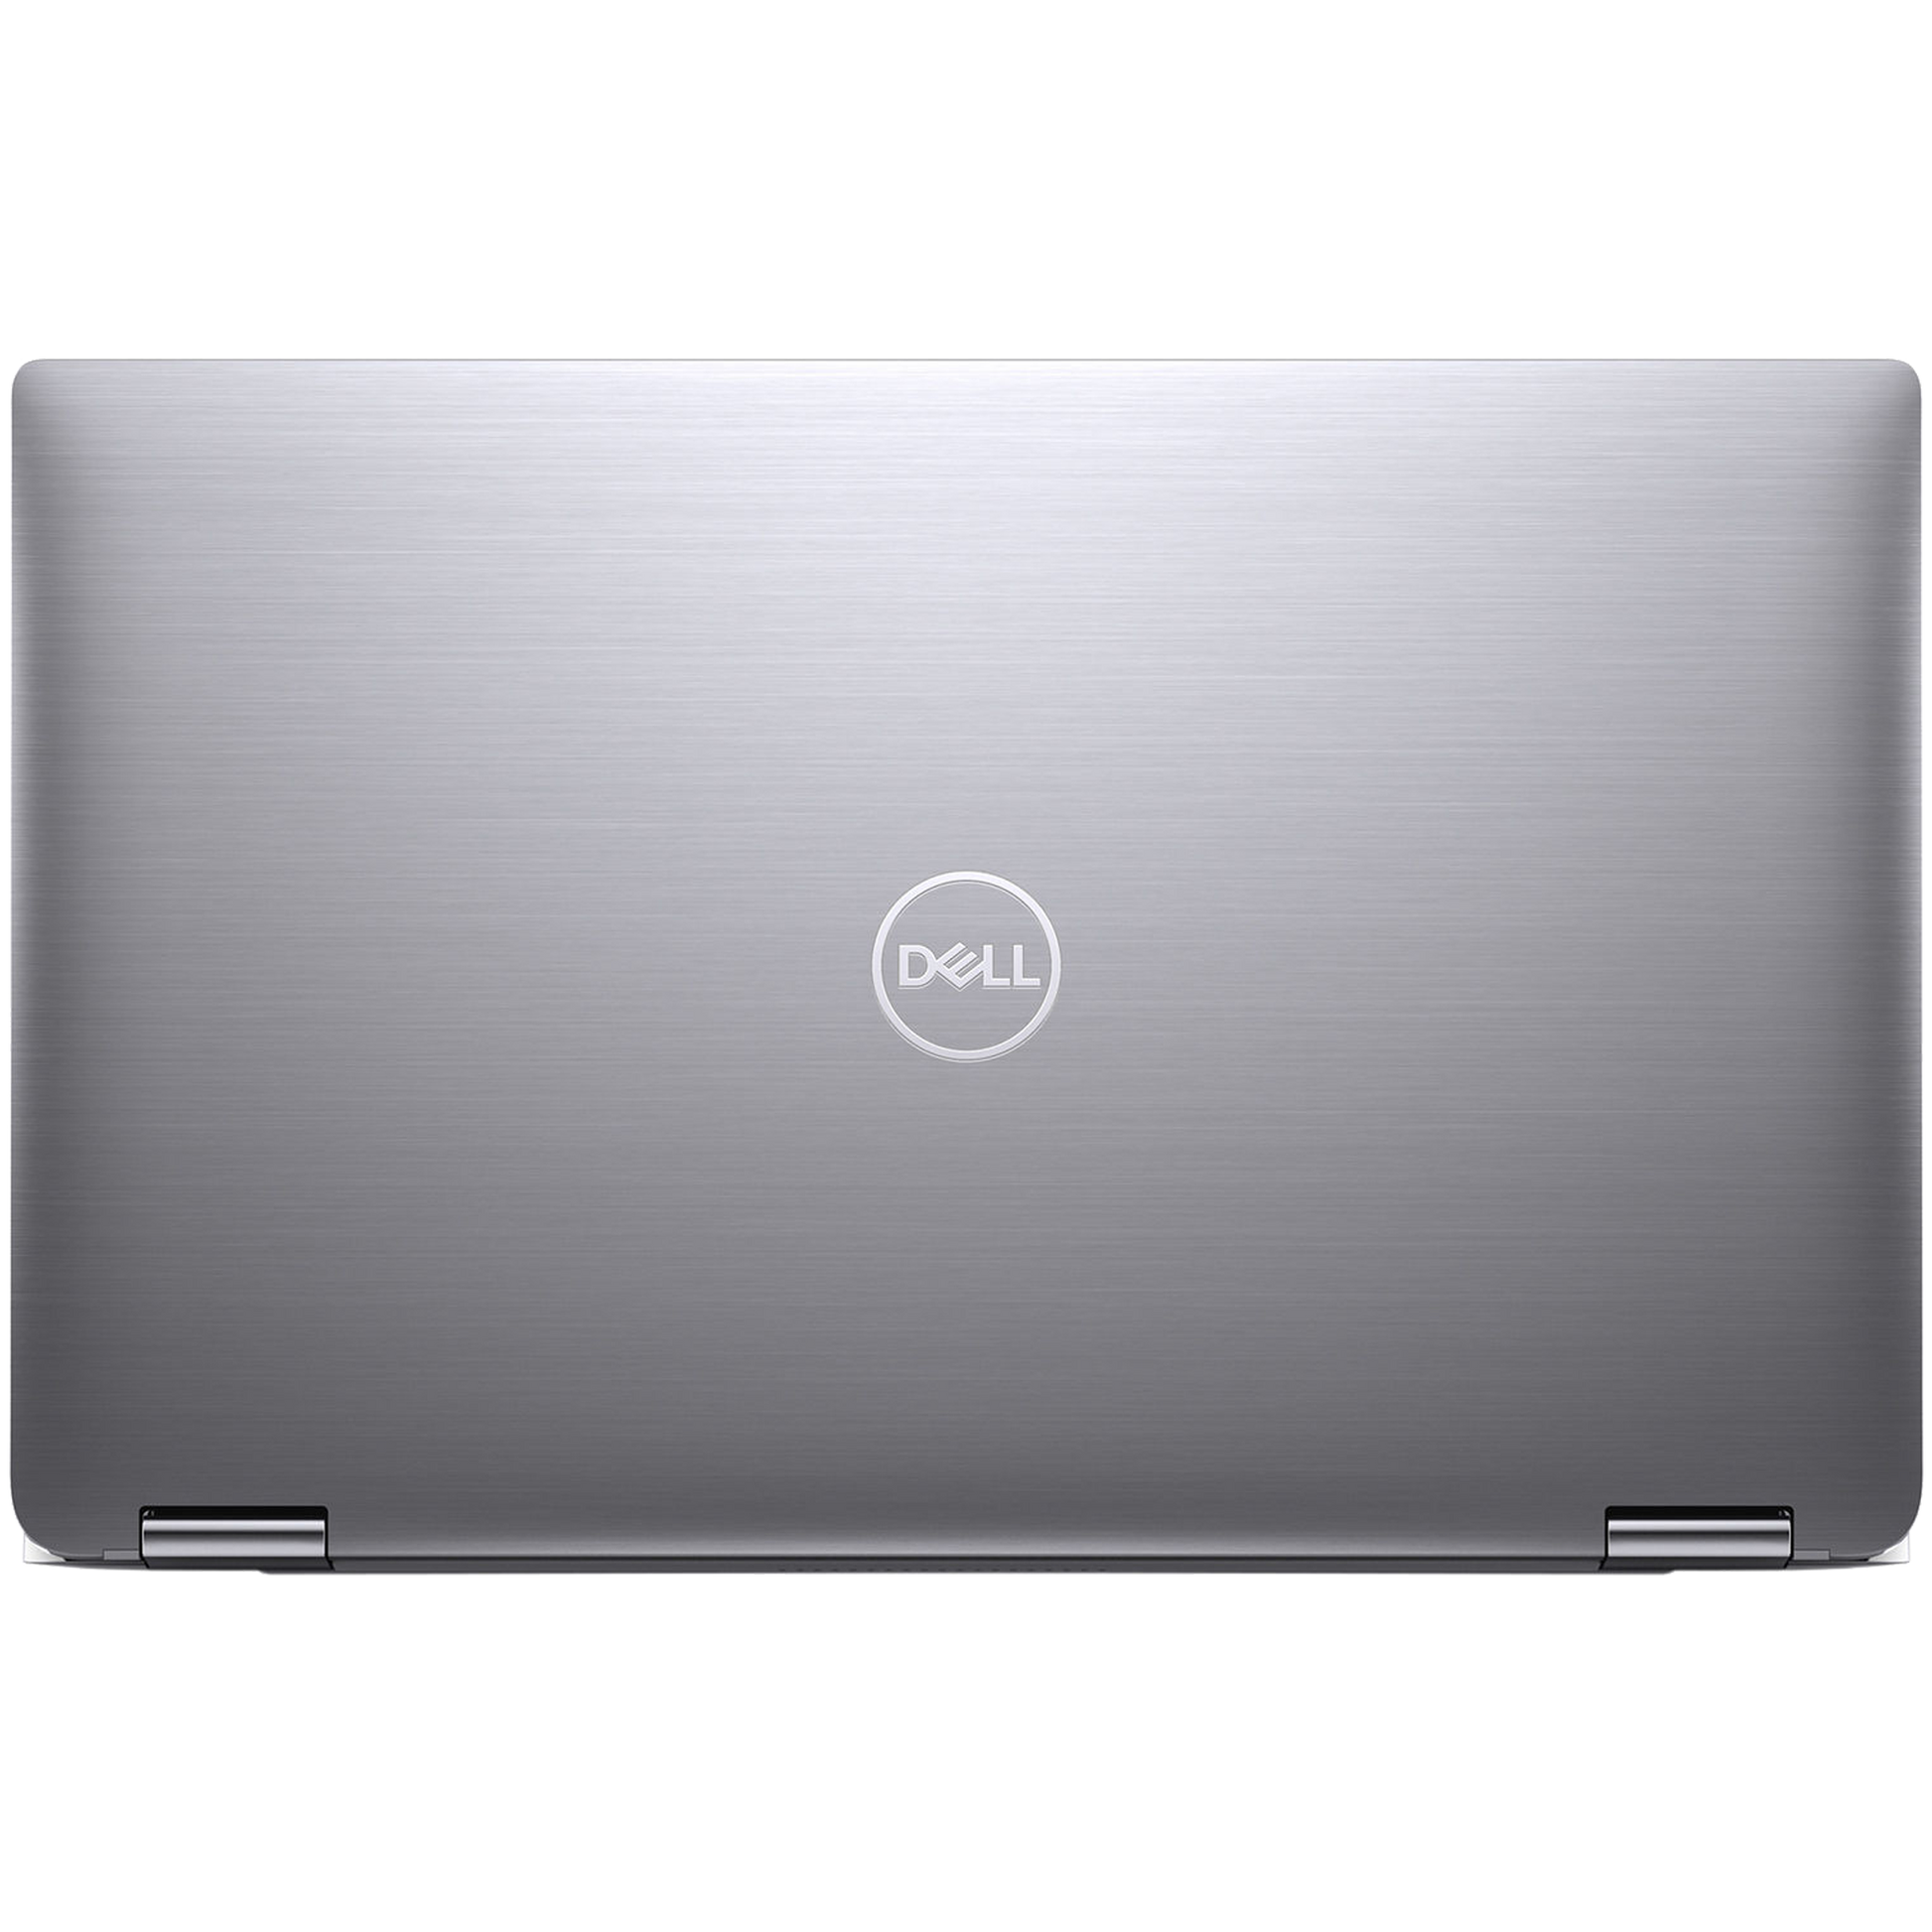 Dell Latitude 7400 2-in-1 Intel i5, 8th Gen Laptop with 16GB Ram Laptops - Refurbished